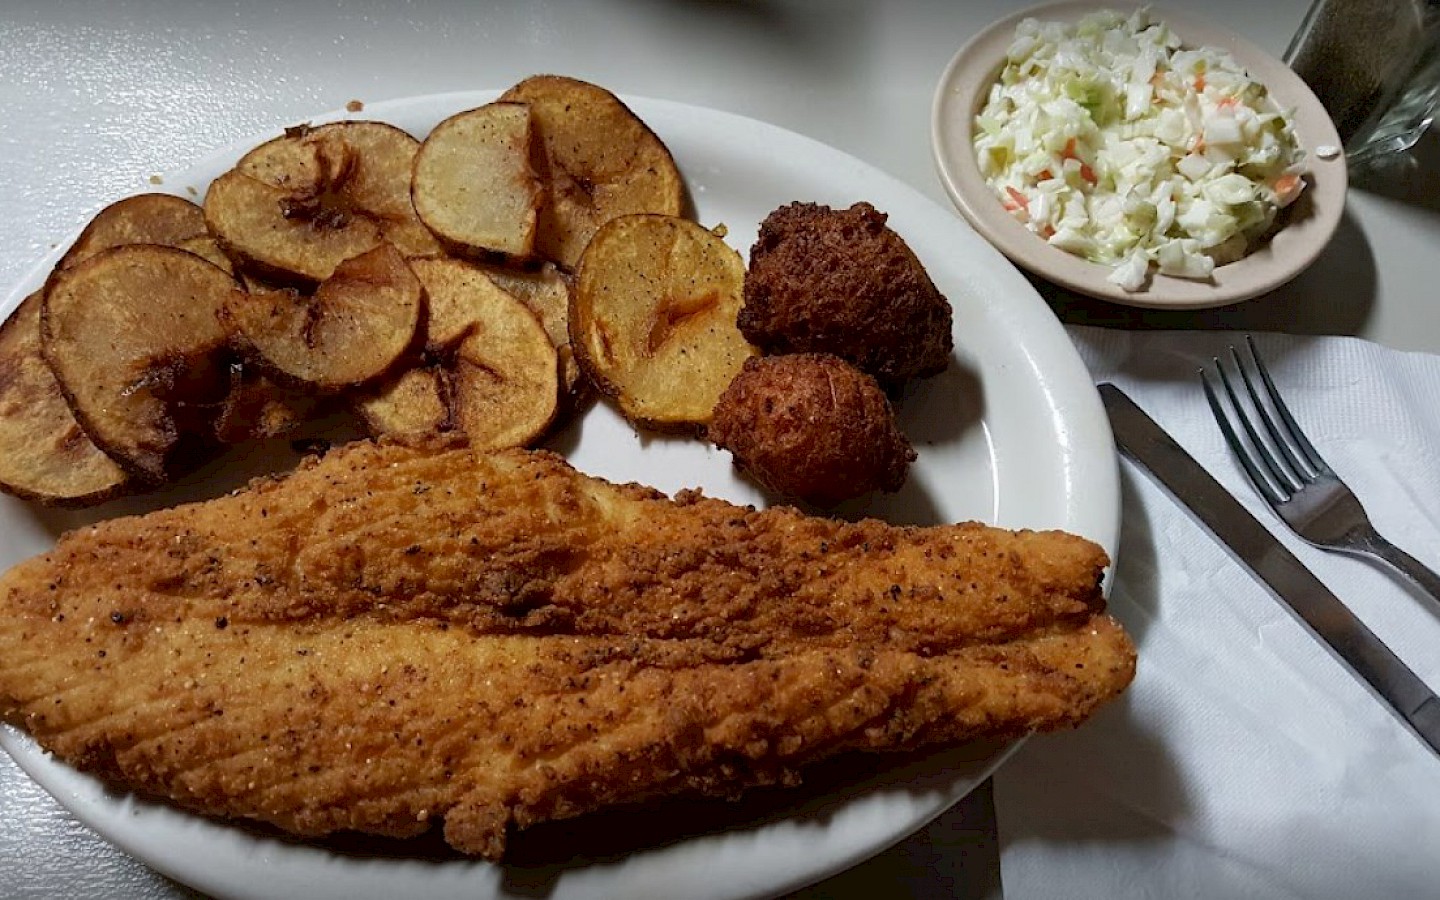 fried catfish, French fries, hush puppies, and a bowl of coleslaw